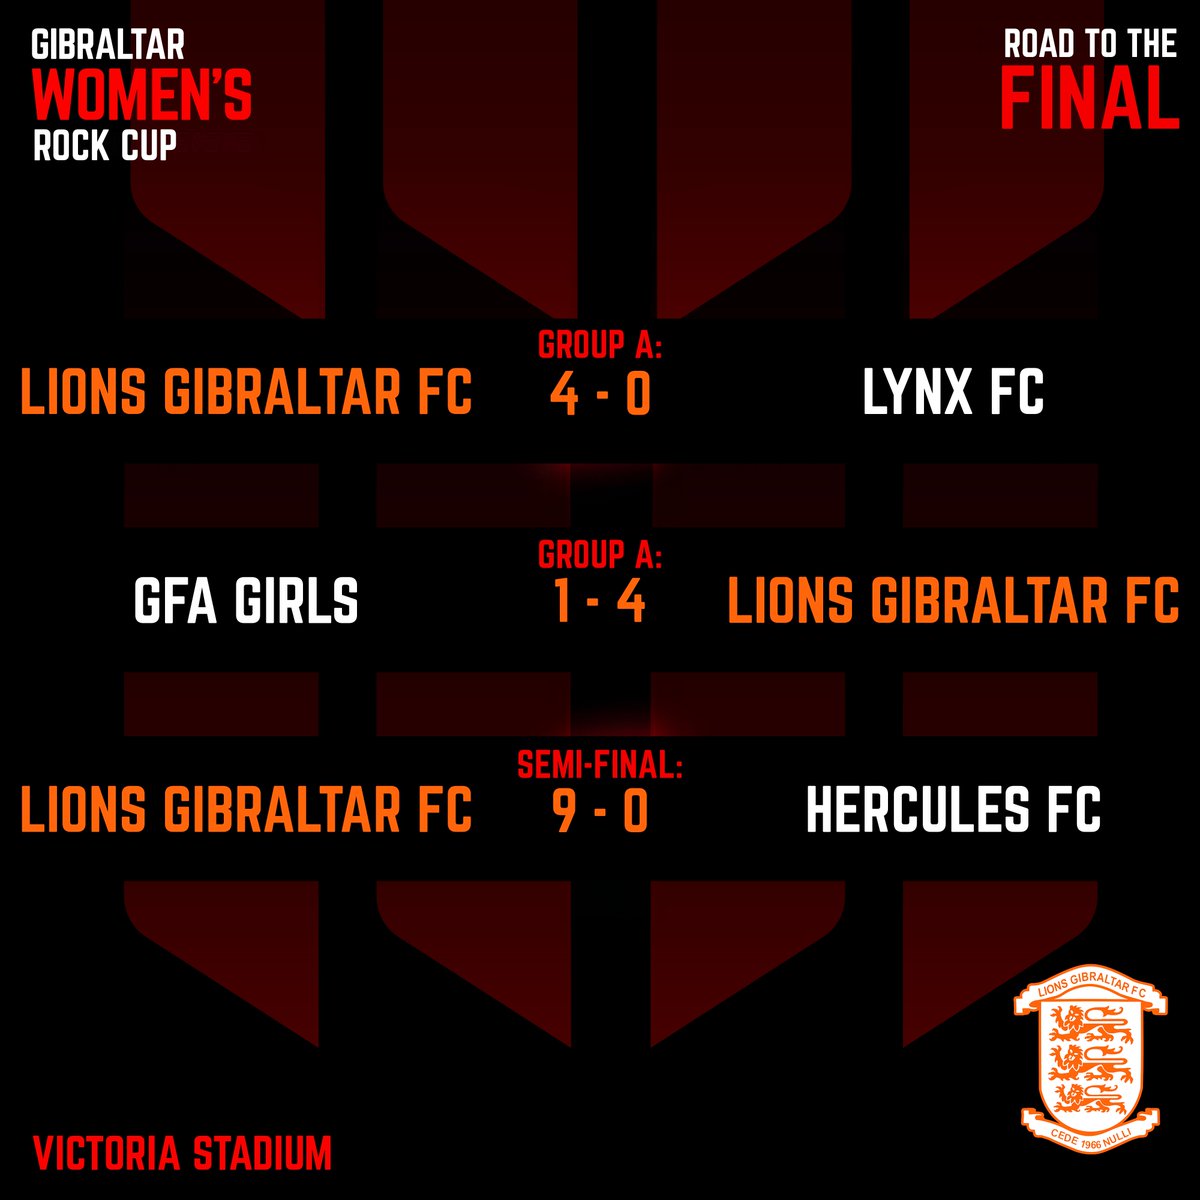 Tonight at 19:00, @europafc and @LionsGibFC go head to head in the Women's Rock Cup Final 🏆 Check out the Road to the Final for each club below 👇